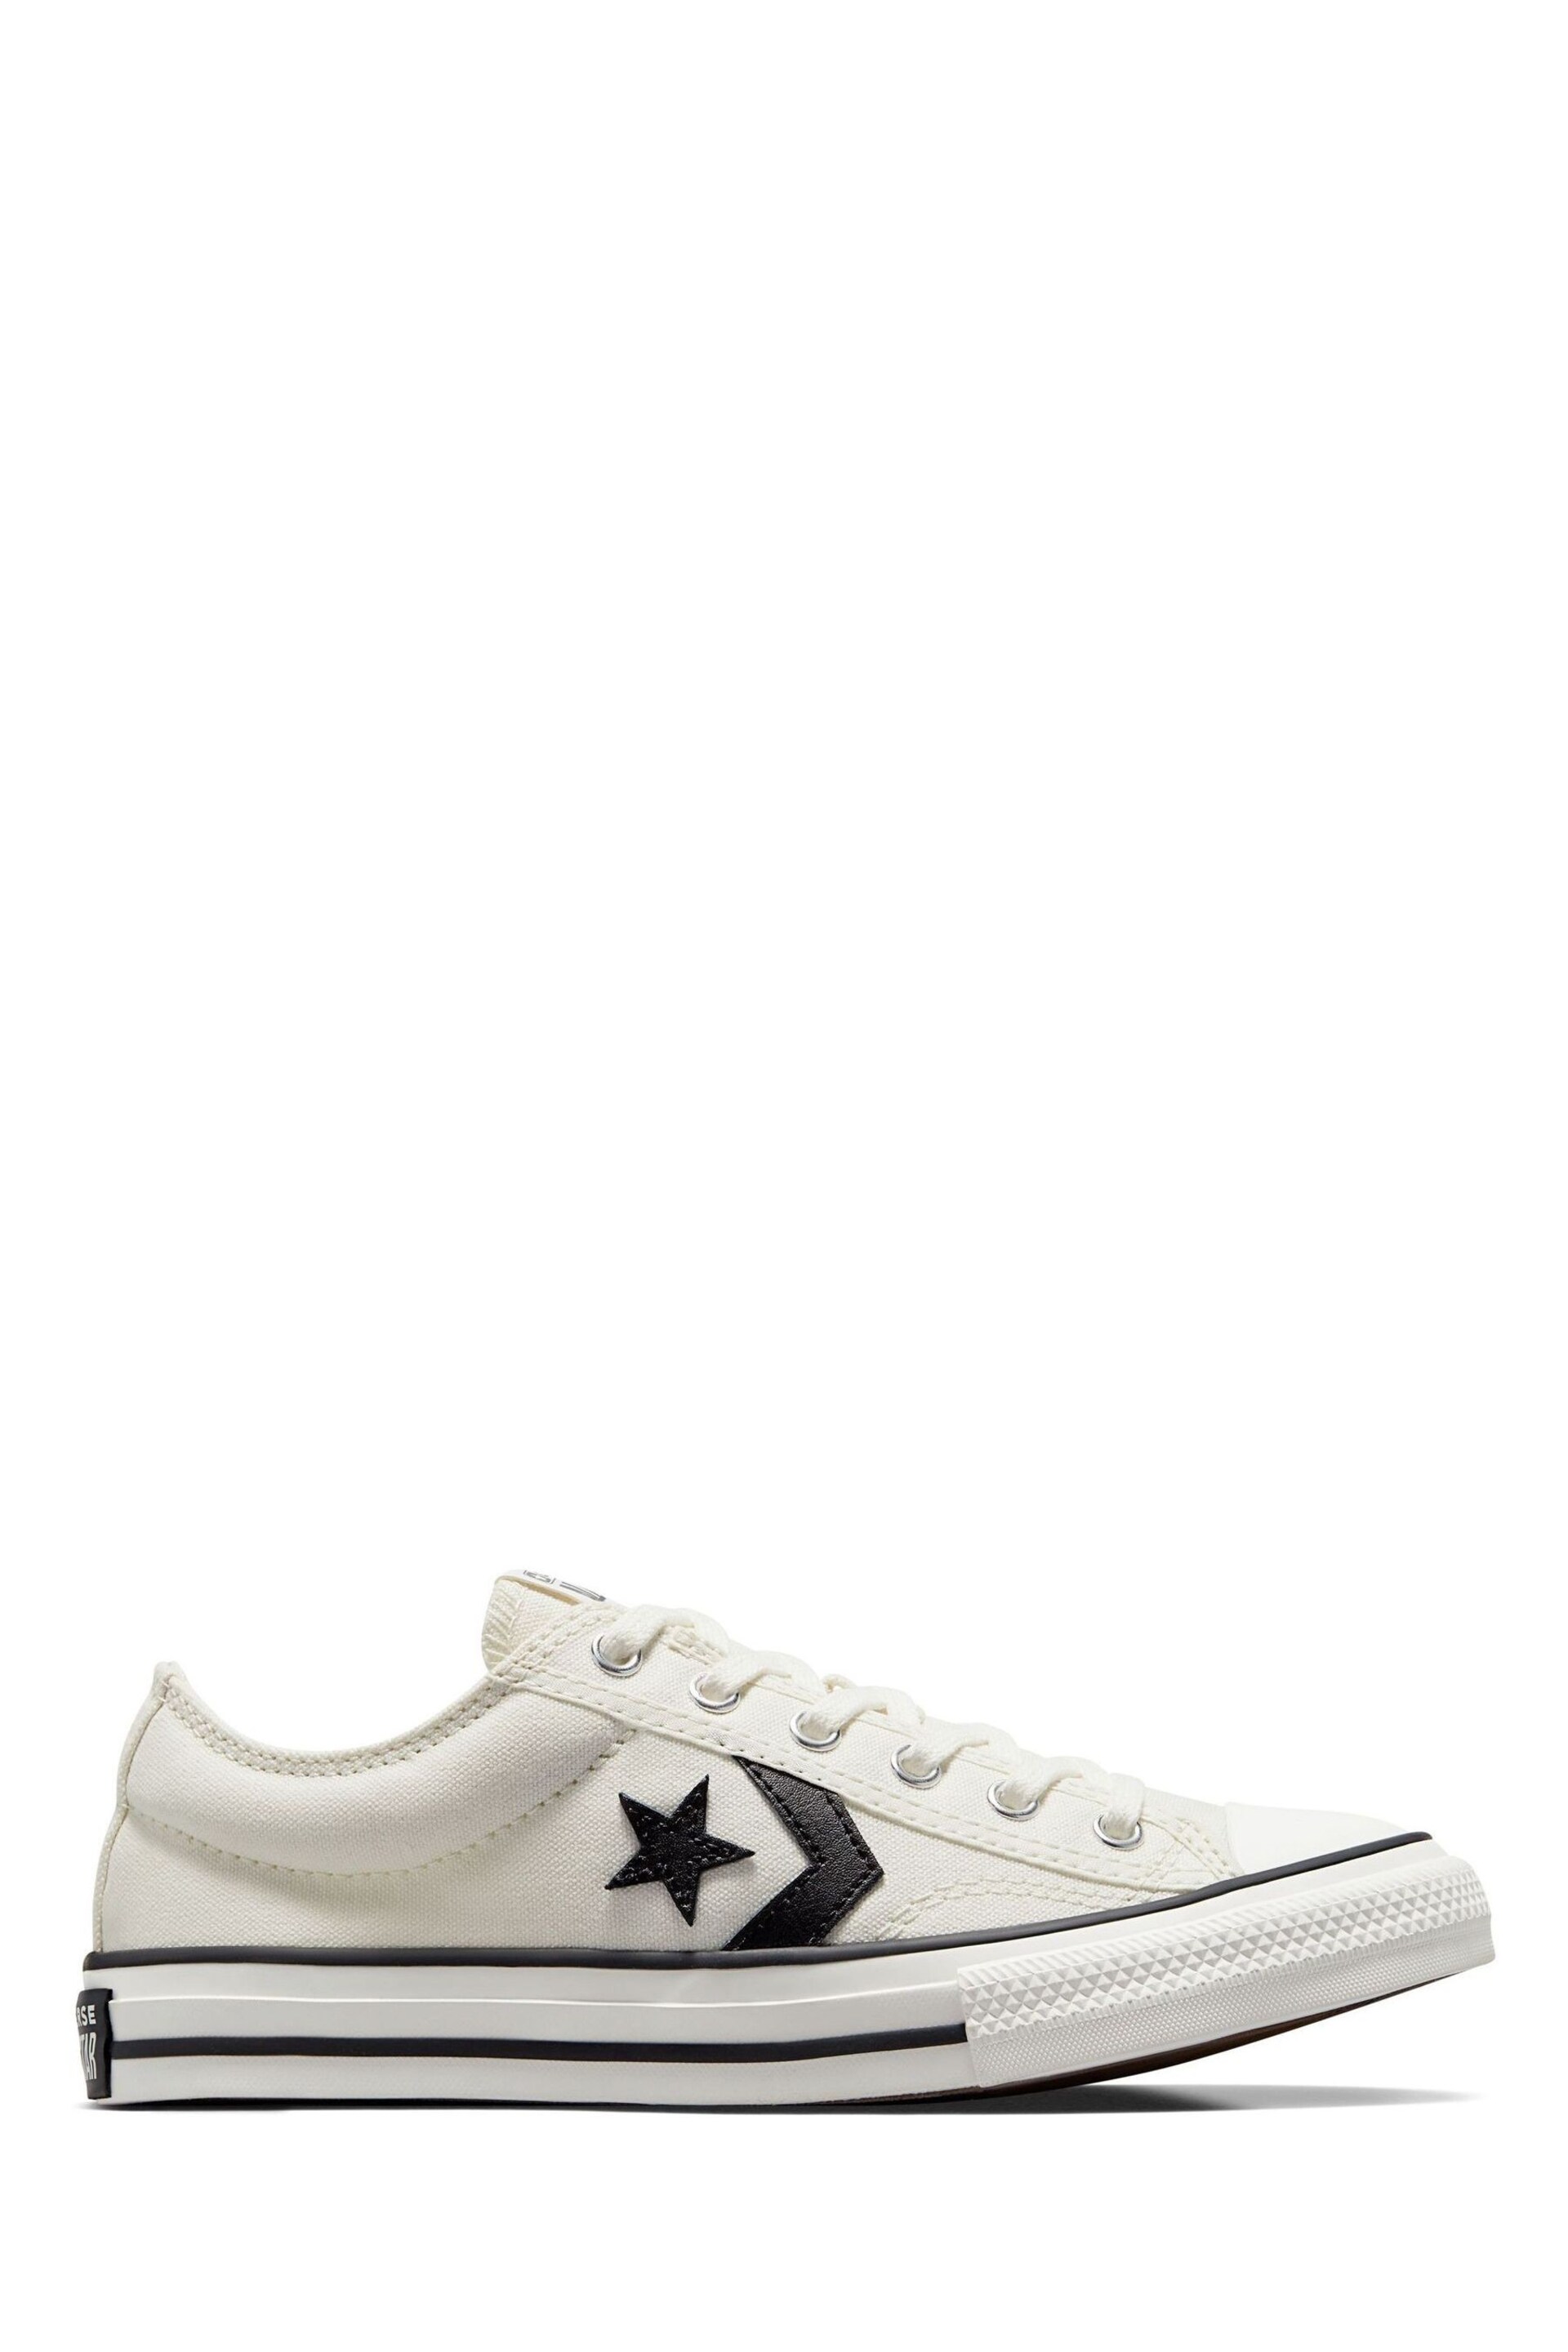 Converse White Youth Star Player 76 Trainers - Image 1 of 7